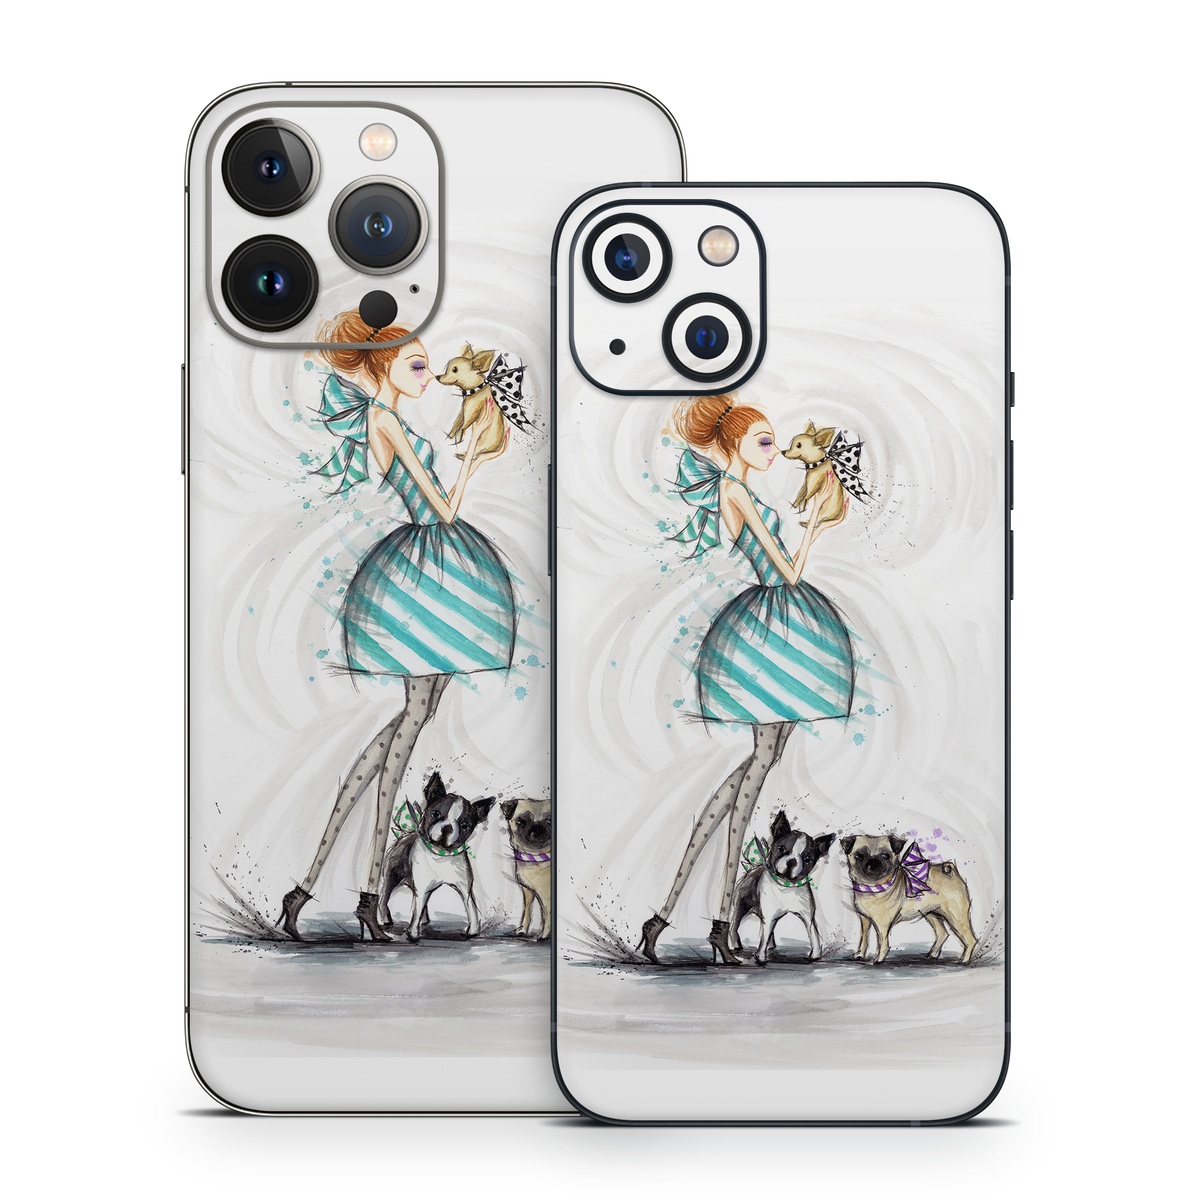 iPhone 13 Skin design of Illustration, Cartoon, Drawing, Art, Costume design, Fictional character, Fashion illustration, Sketch, with gray, black, white, blue, gray, yellow, brown colors